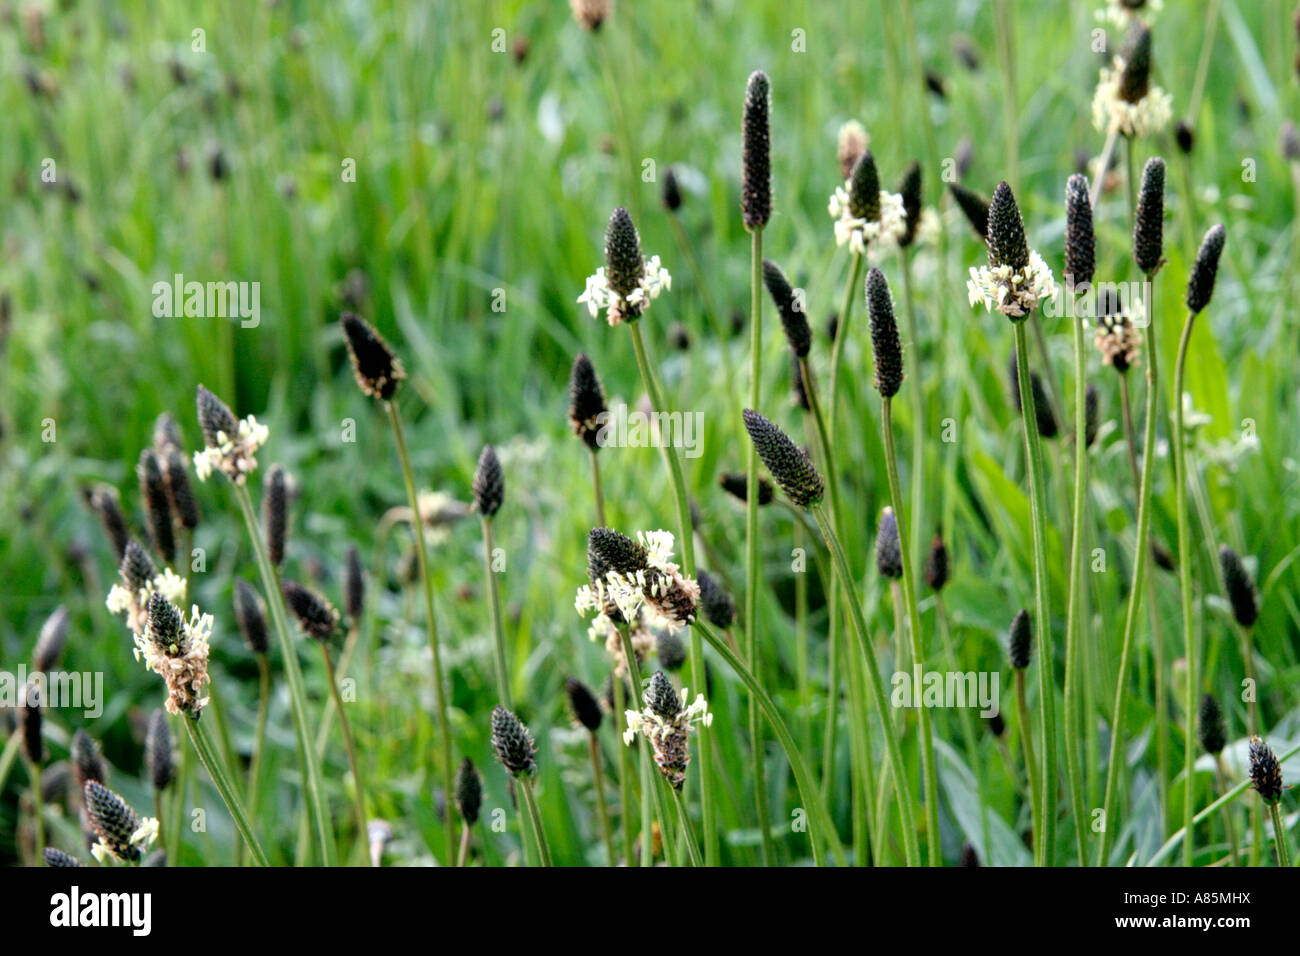 Plantago lanceolata - Ribwort Plantain is a common european wildplant which starts flowering from April Stock Photo